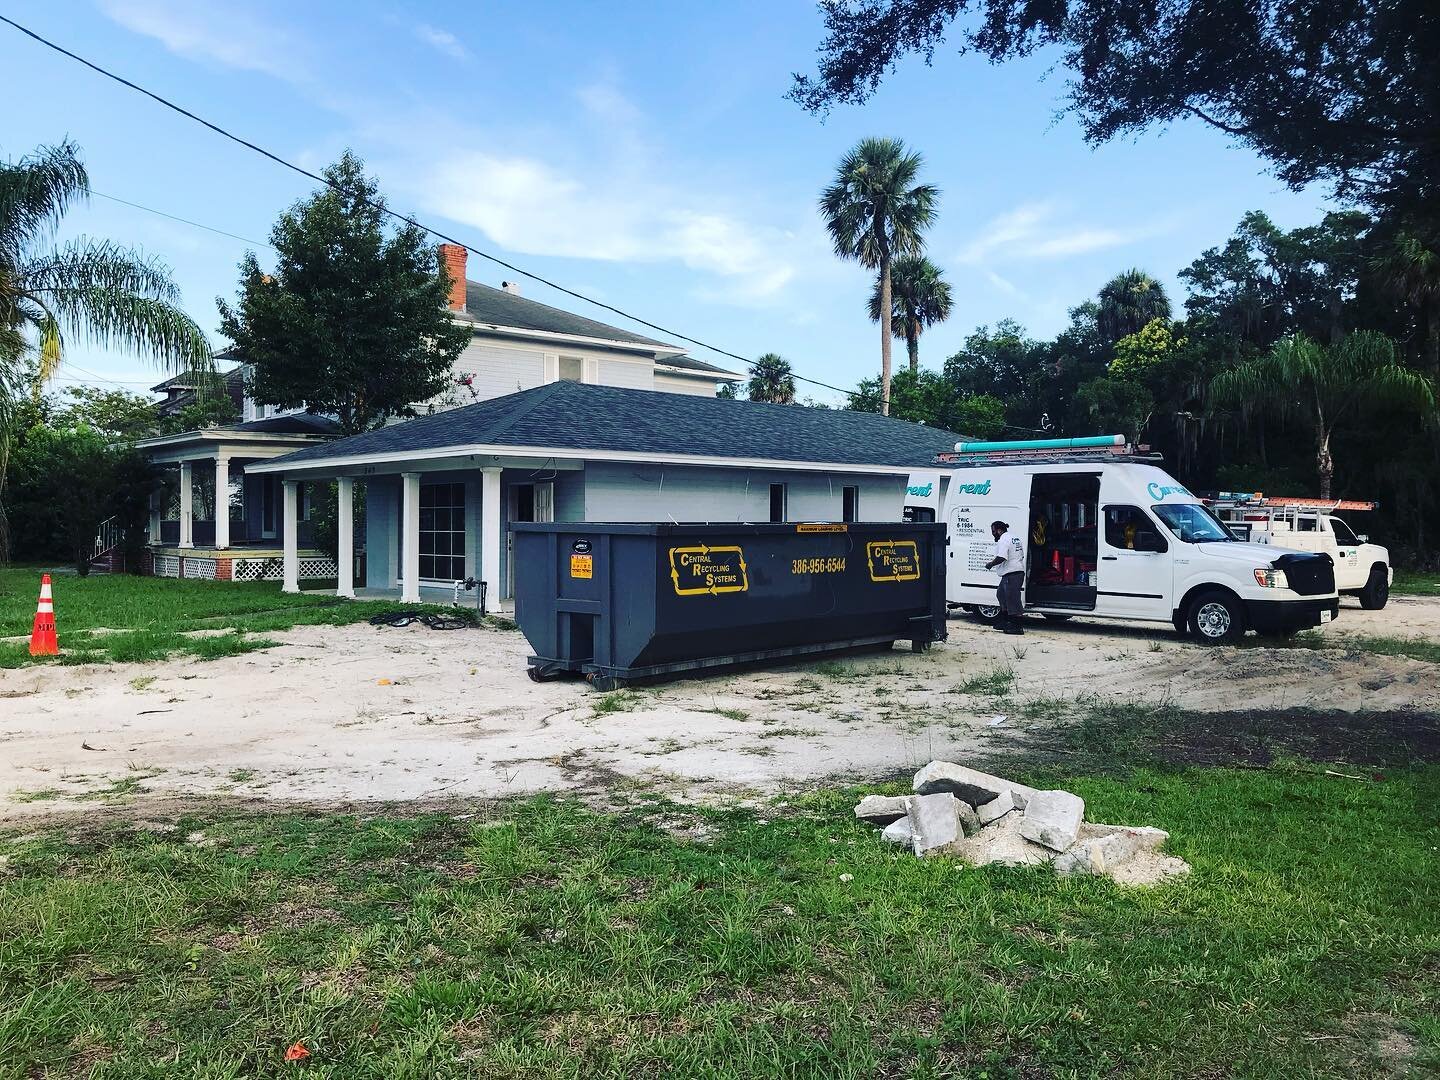 It&rsquo;s great to be done with the HVAC, &amp; electrical in this downtown remodel. Next step here for us, will be spray foam insulation. Stay tuned!  #currentsituation #remodels #electric #hvac #sprayfoaminsulation #energysolutions #current #delan